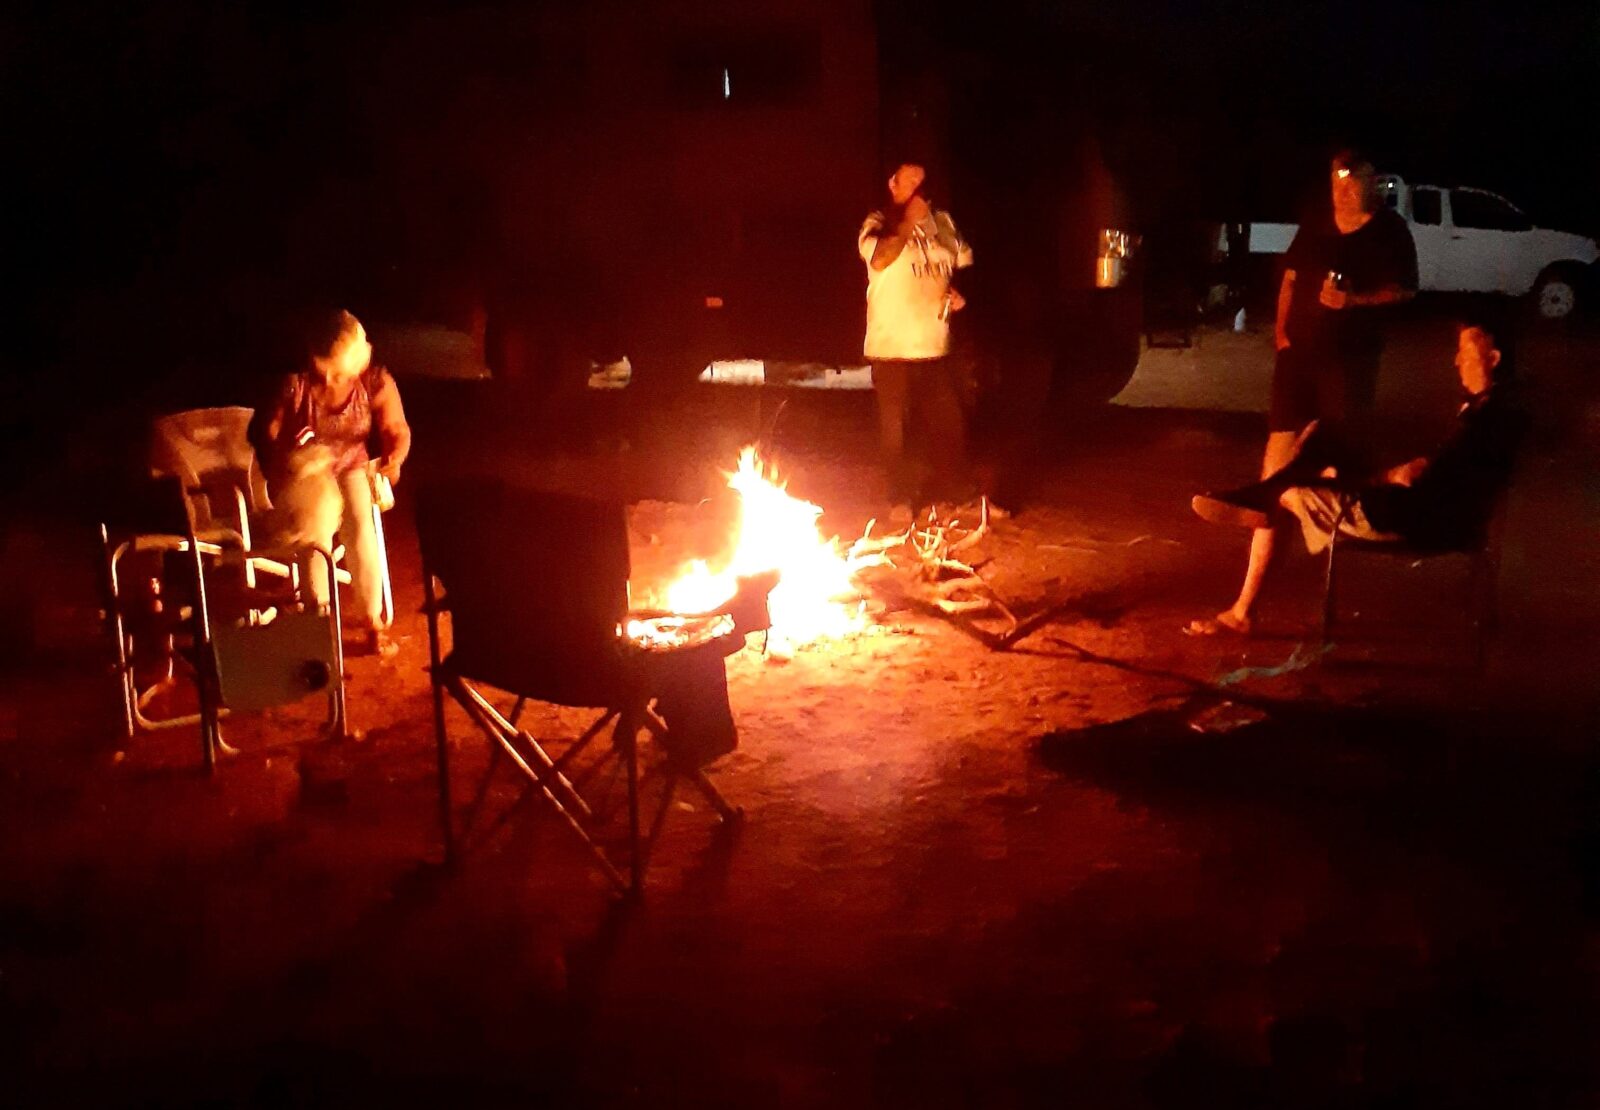 Making memories and striking gold around the campfire